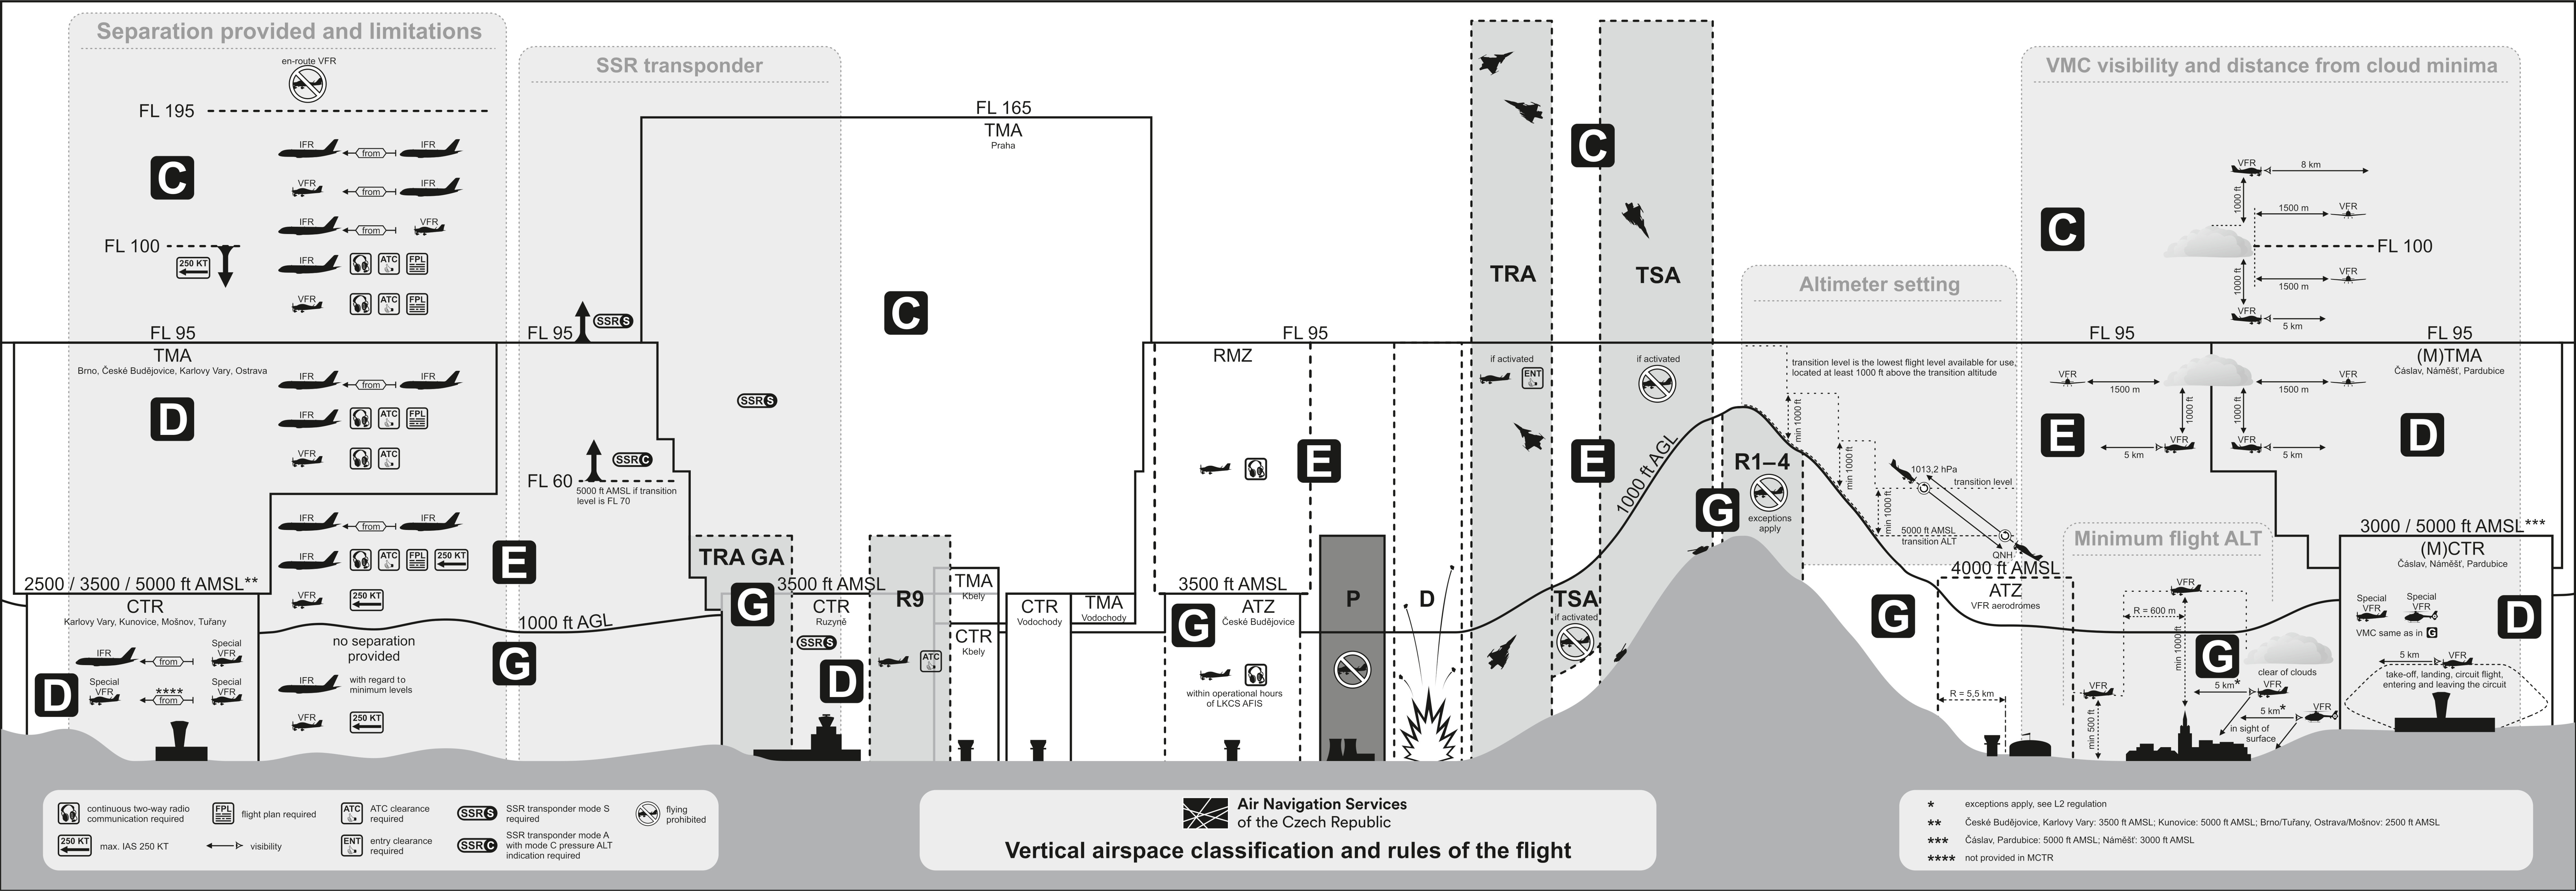 Airspace clasification